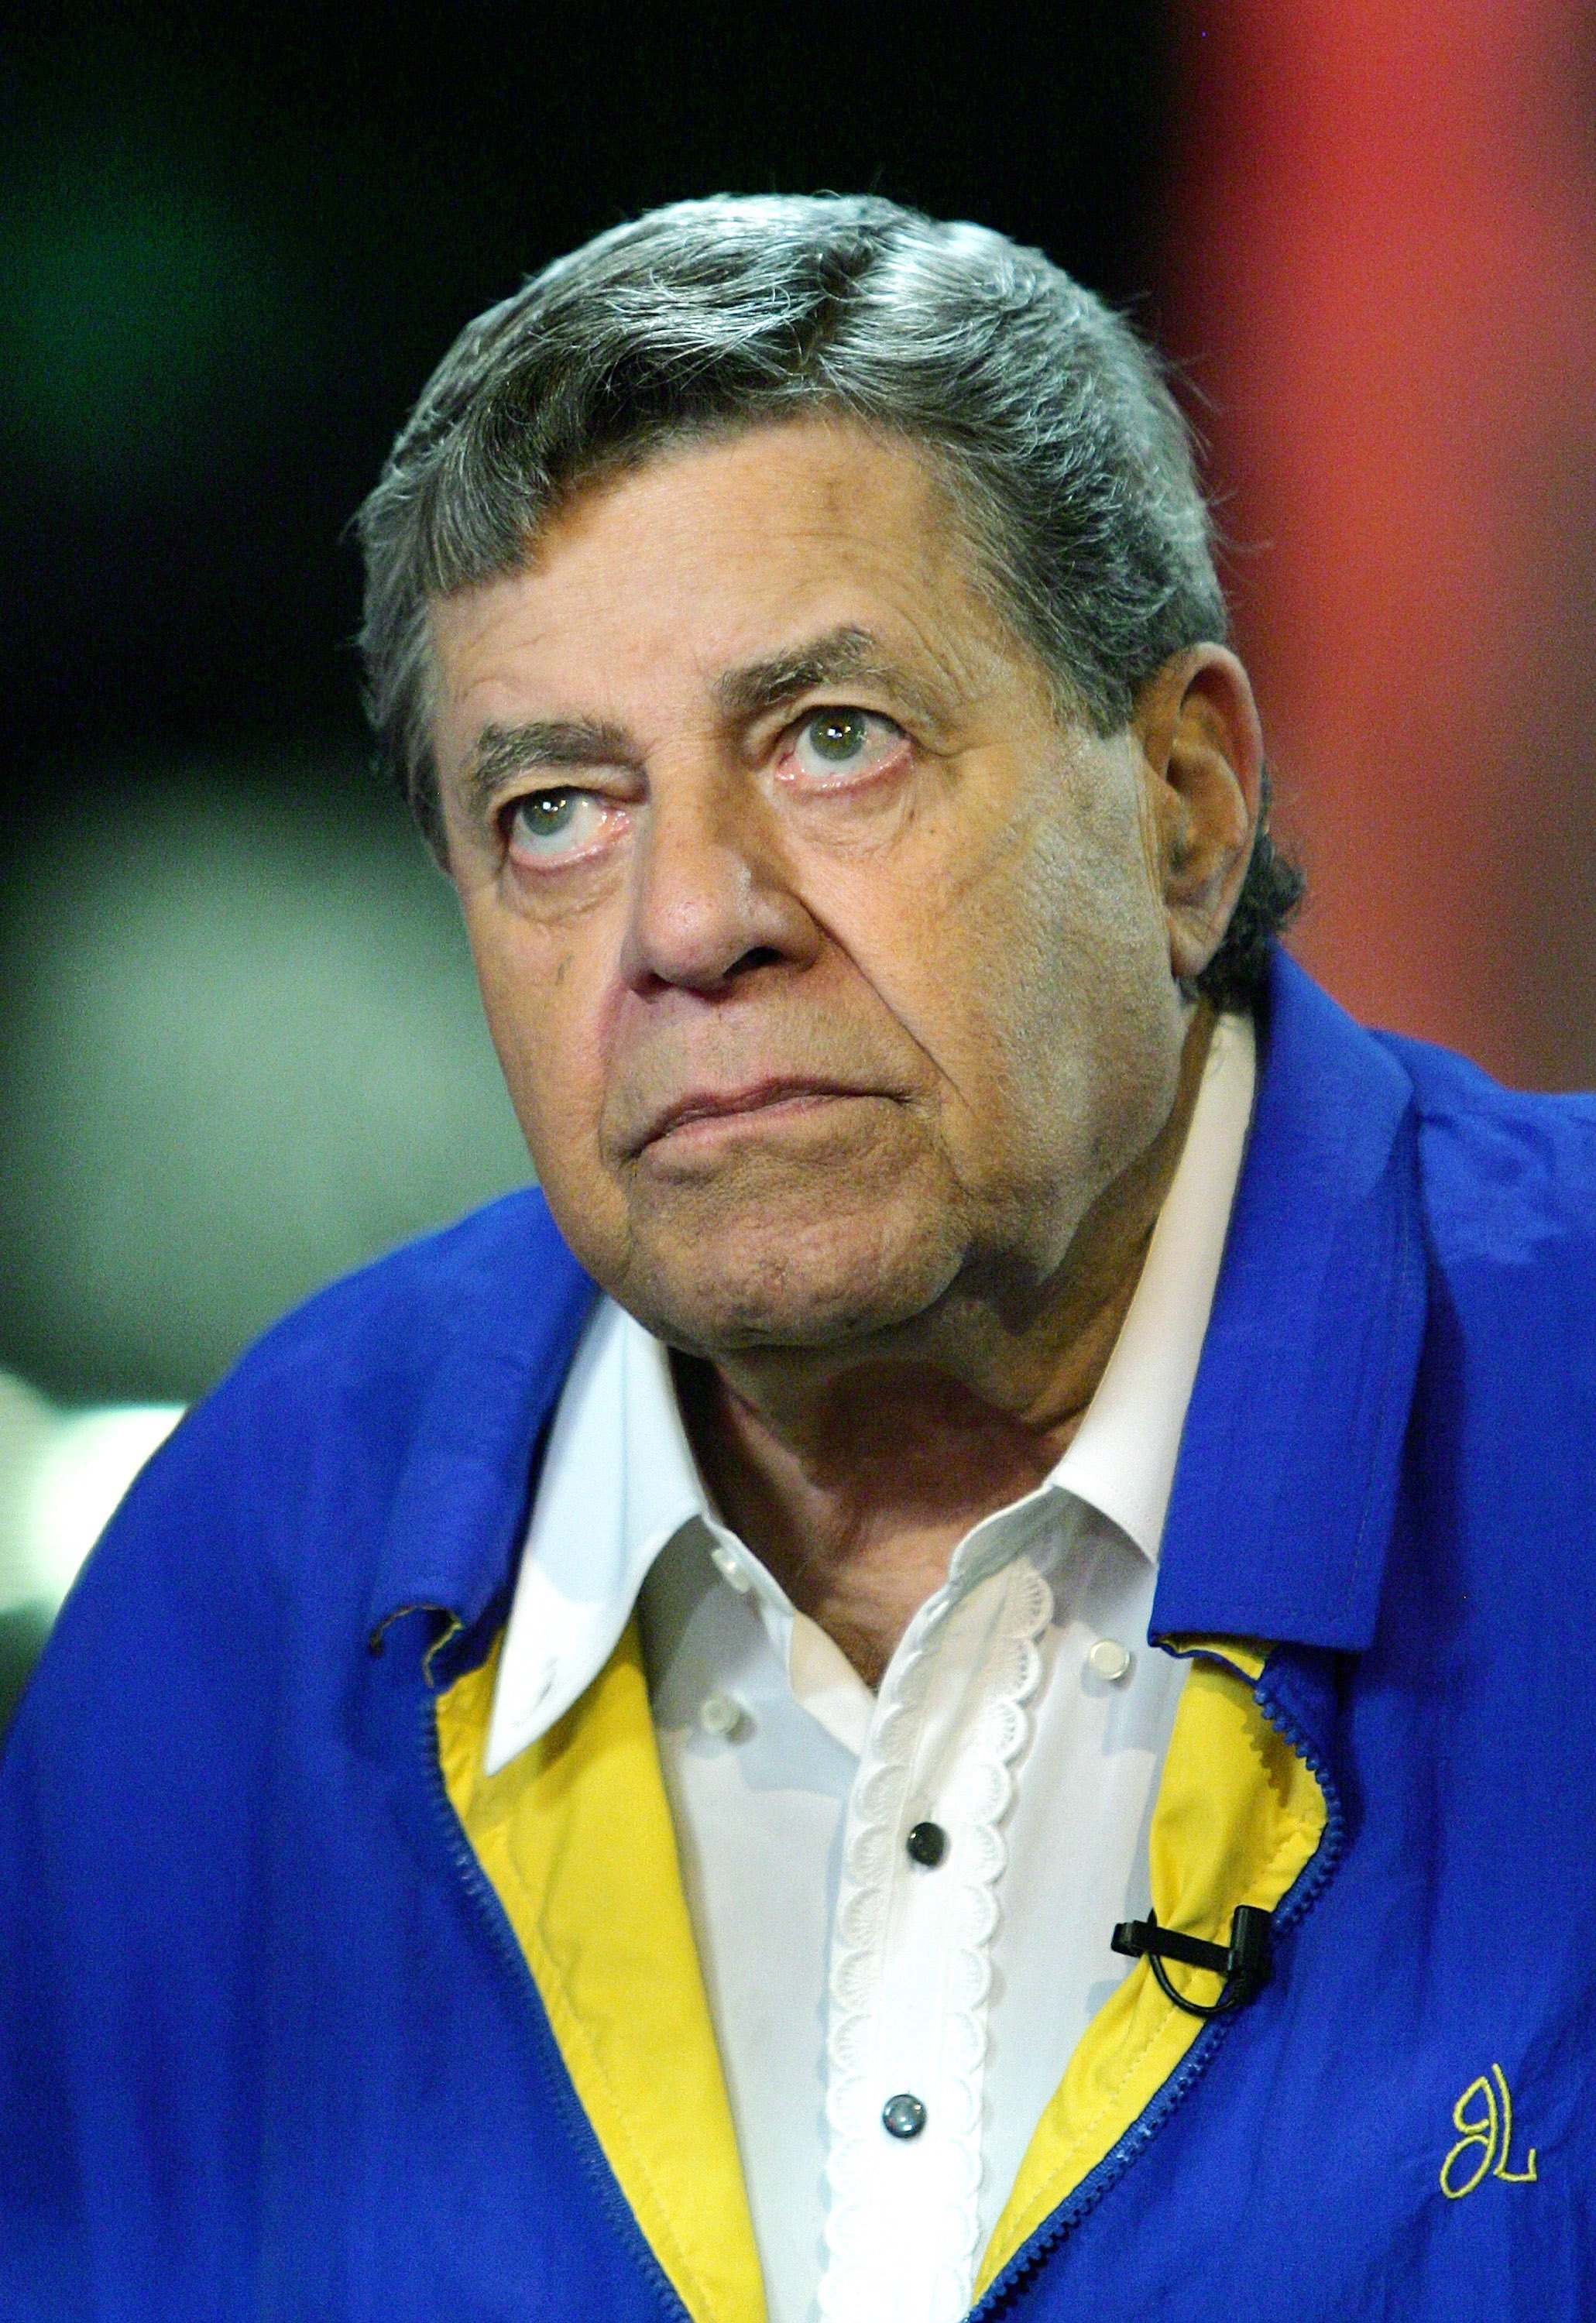 Jerry Lewis during an interviewed before the 41st annual Labor Day Telethon on August 22, 2006 in Las Vegas, Nevada. / Source: Getty Images